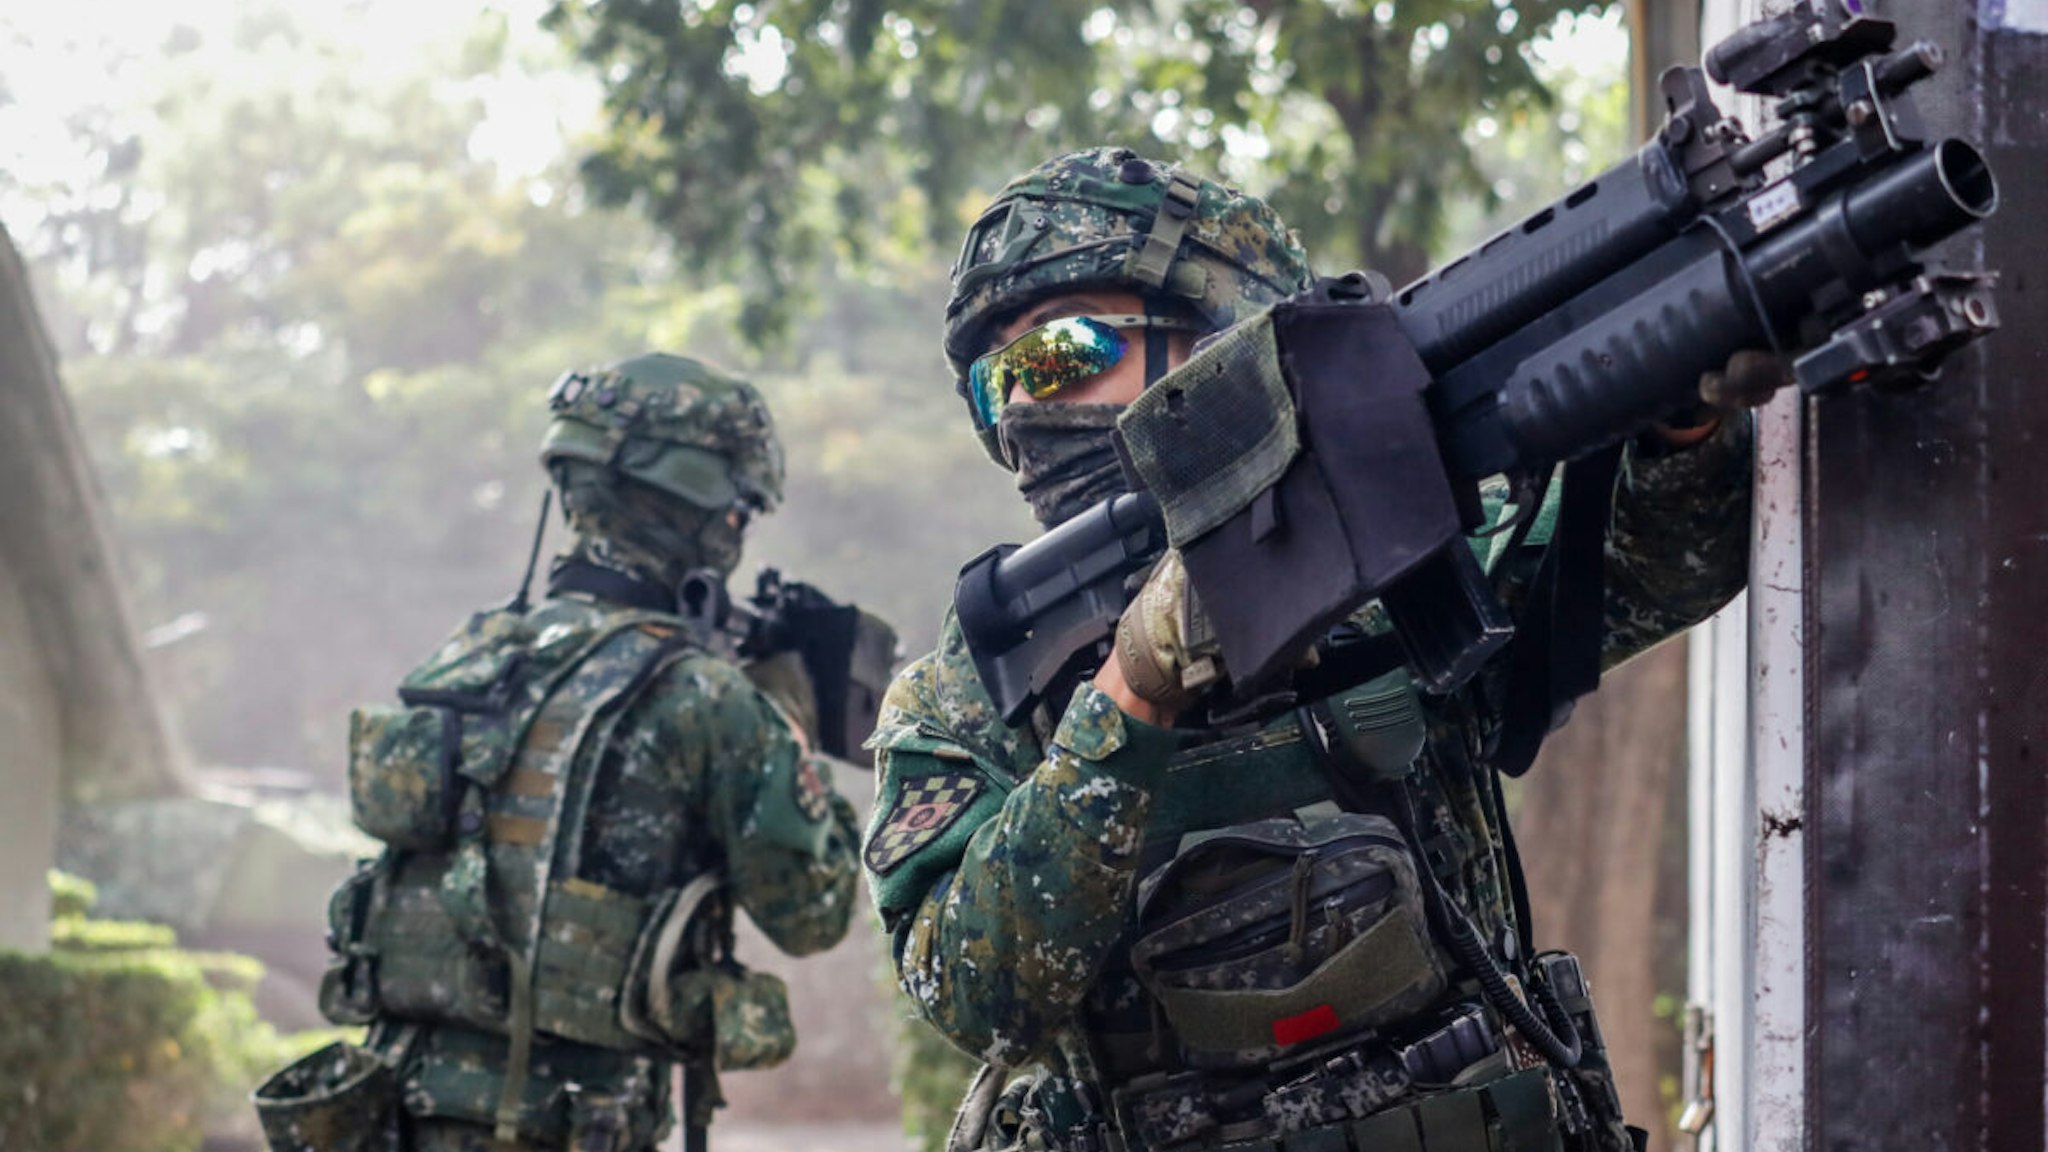 Taiwanese army soldiers during a Readiness Enhancement Drill, amid escalating Taiwan-China tensions, in Taiwan, January 2022.